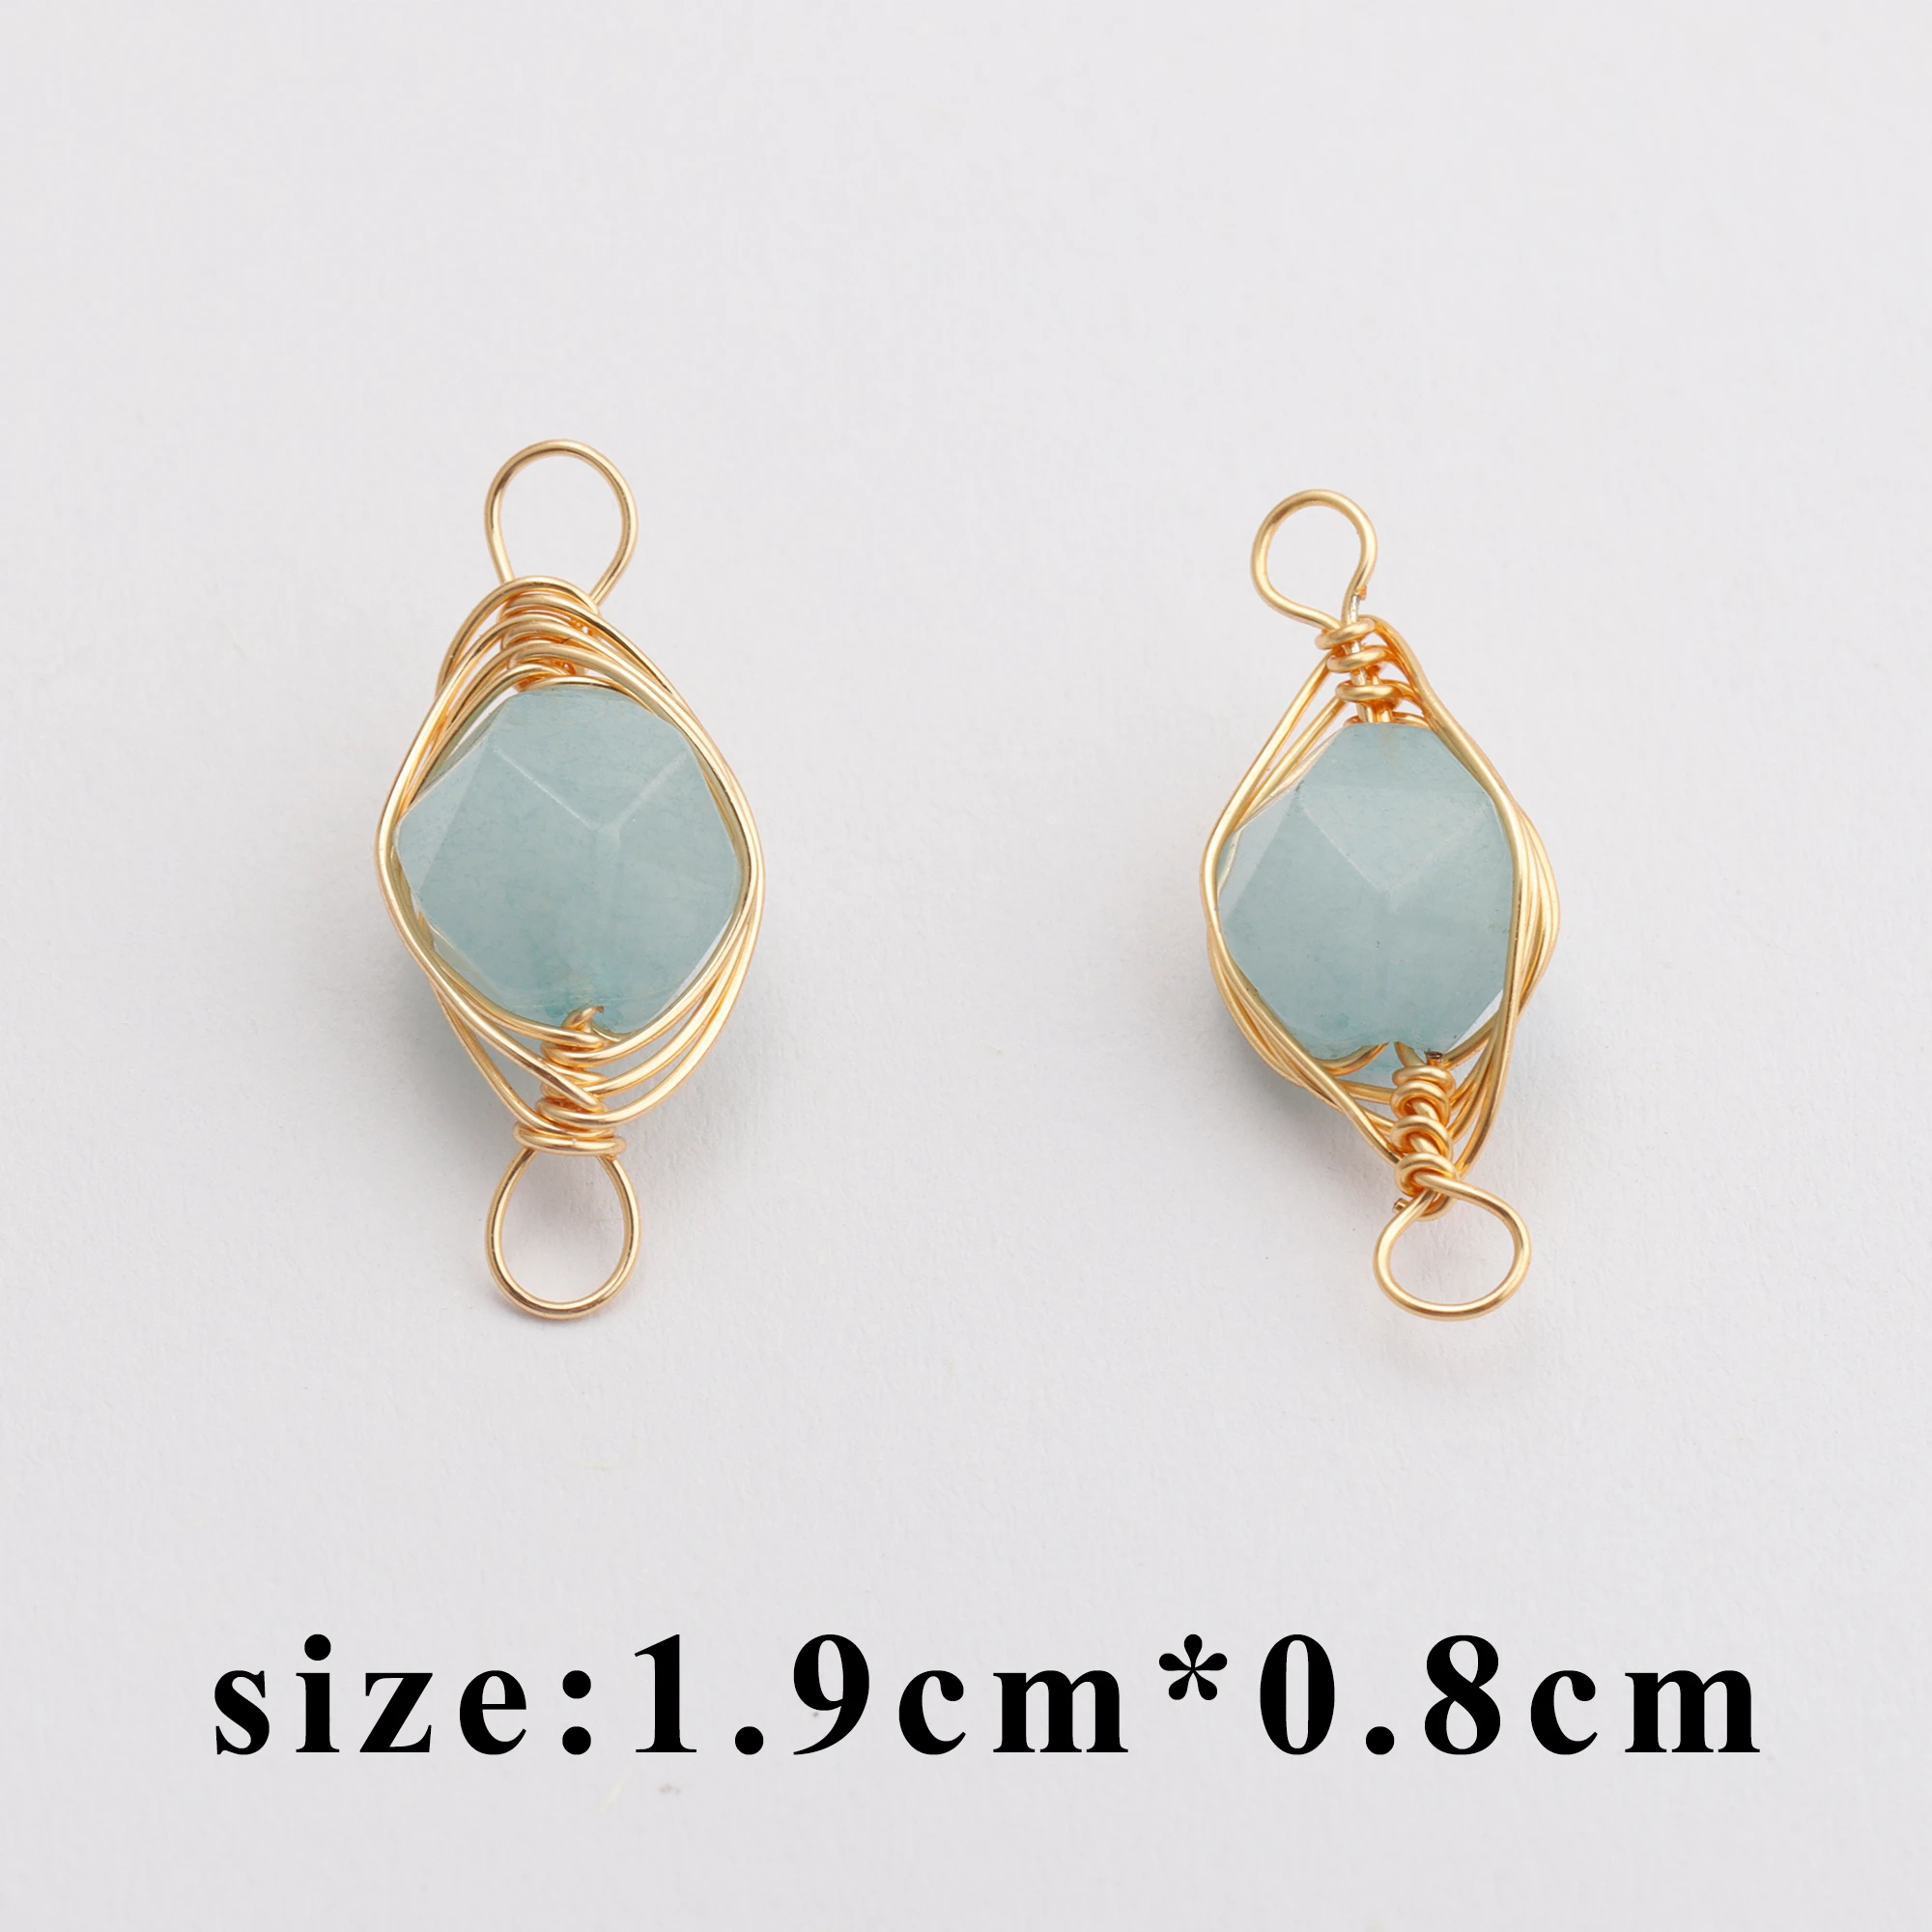 Wholesale high quality 18K gold plated natural stone diy handmade earrings jewelry making accessories,M749,10 pcs/lot